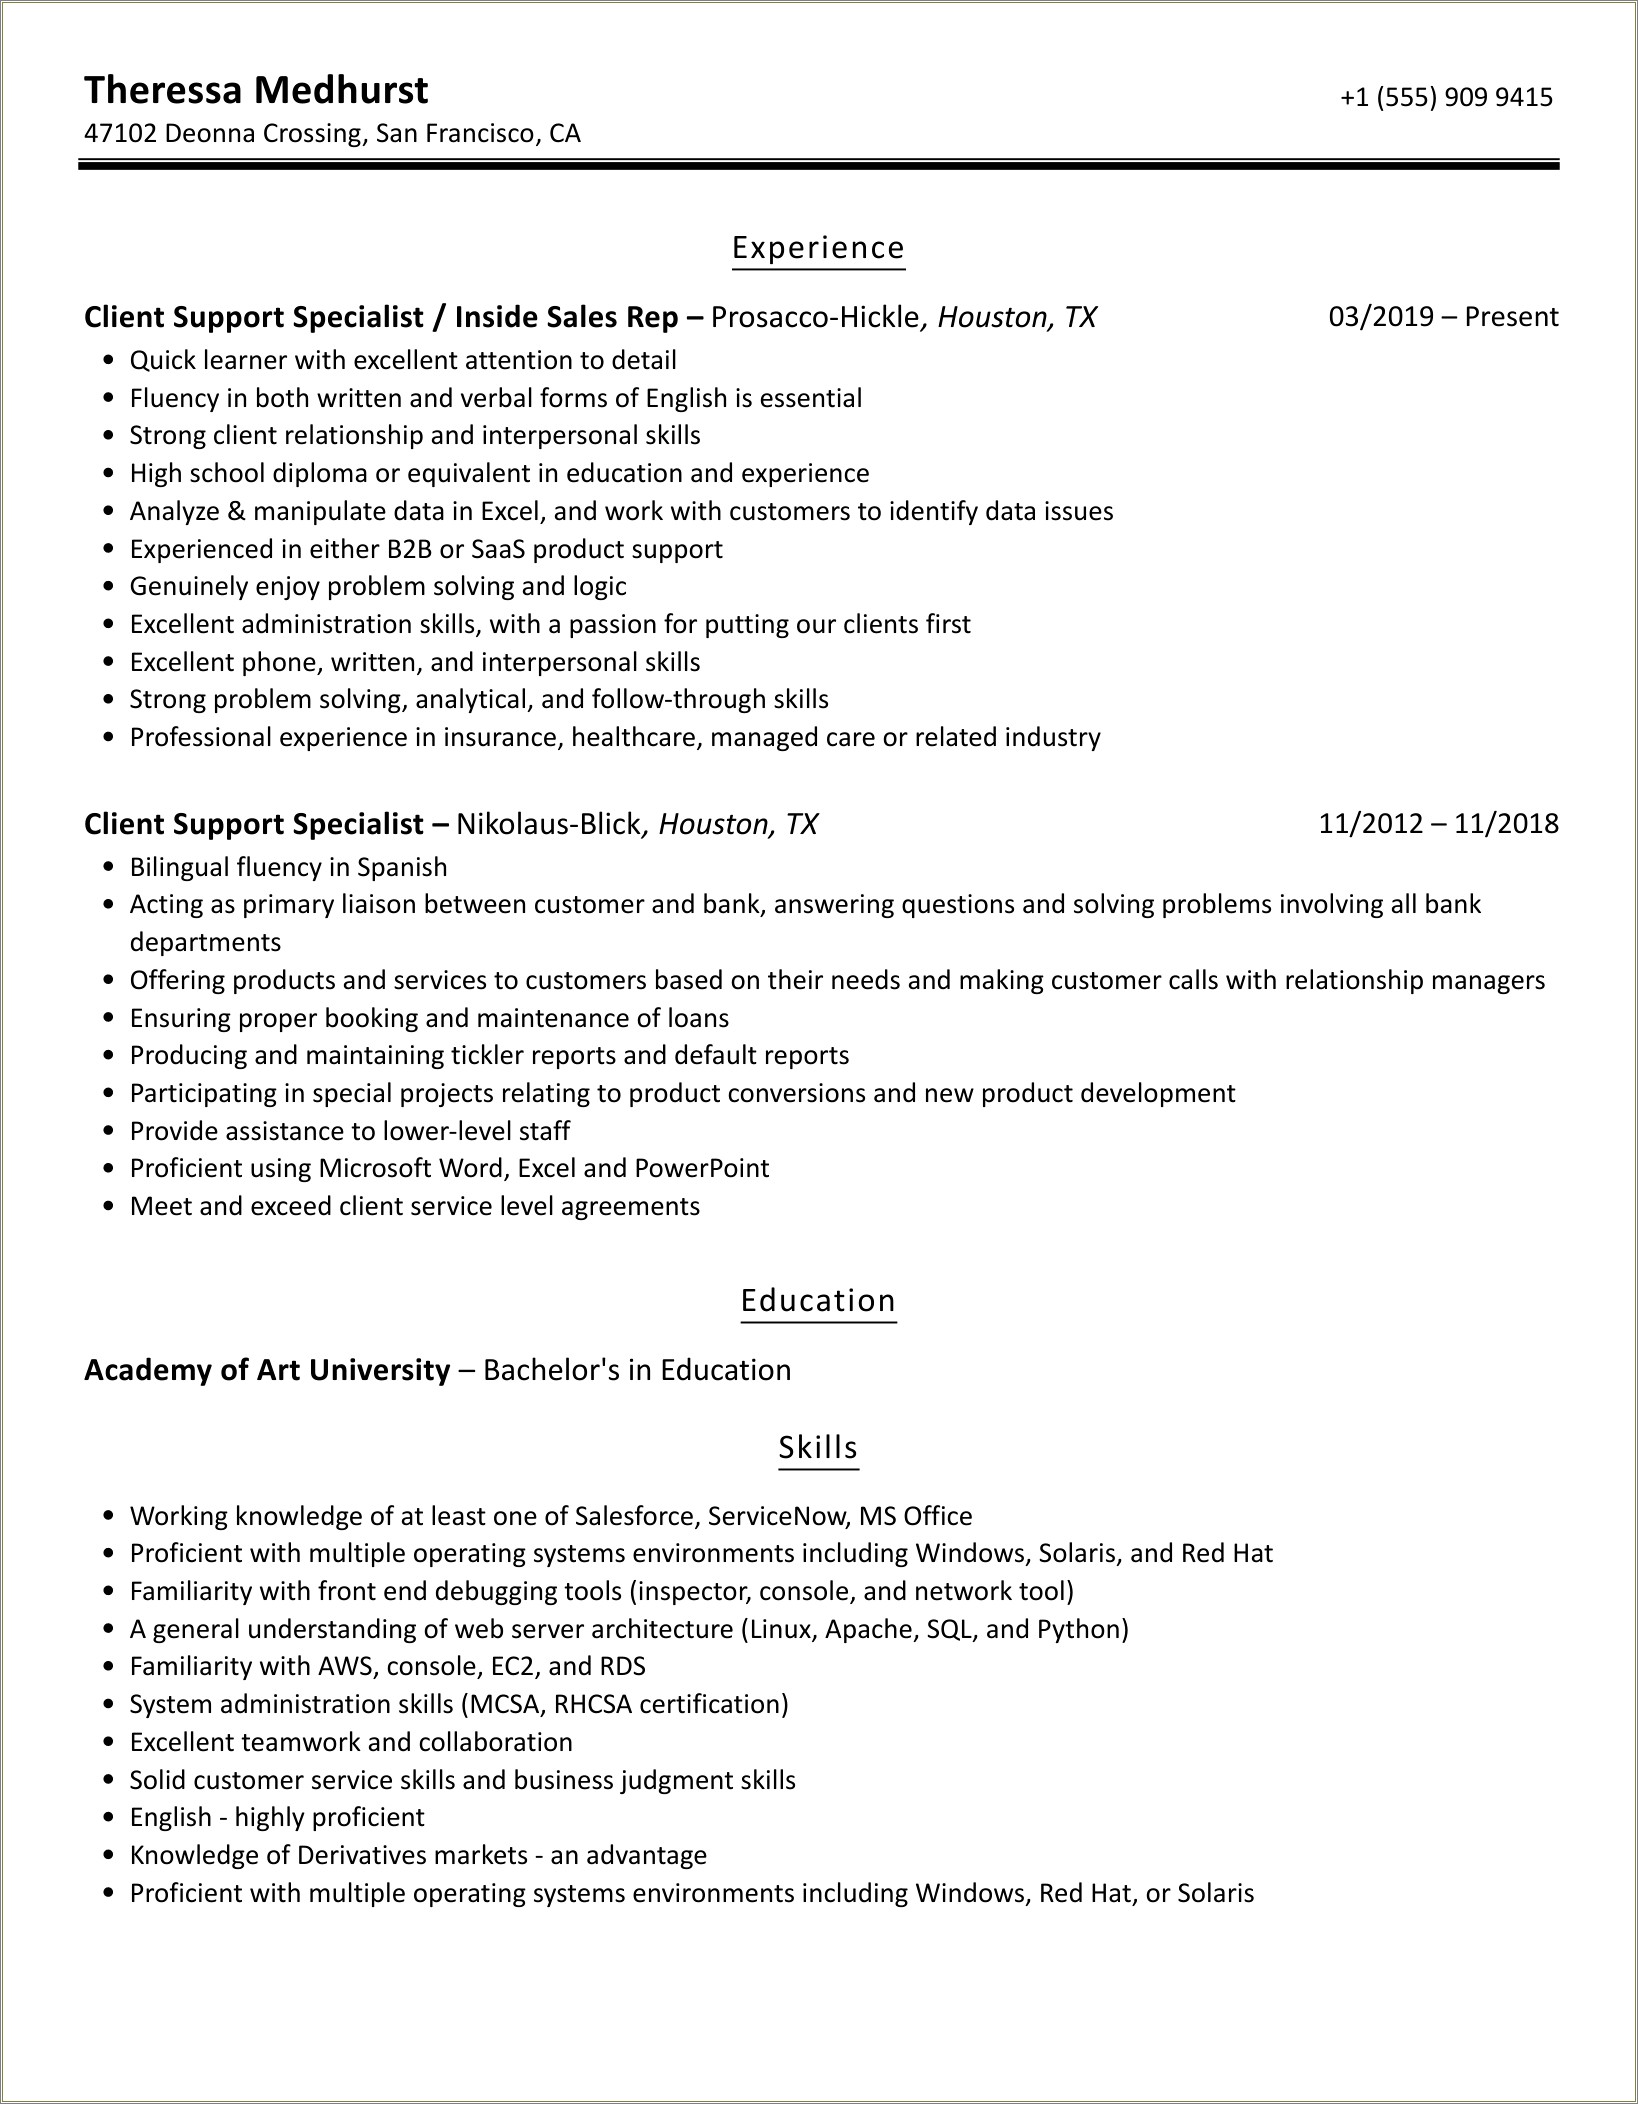 Client Support Specialist Job Resume Objective